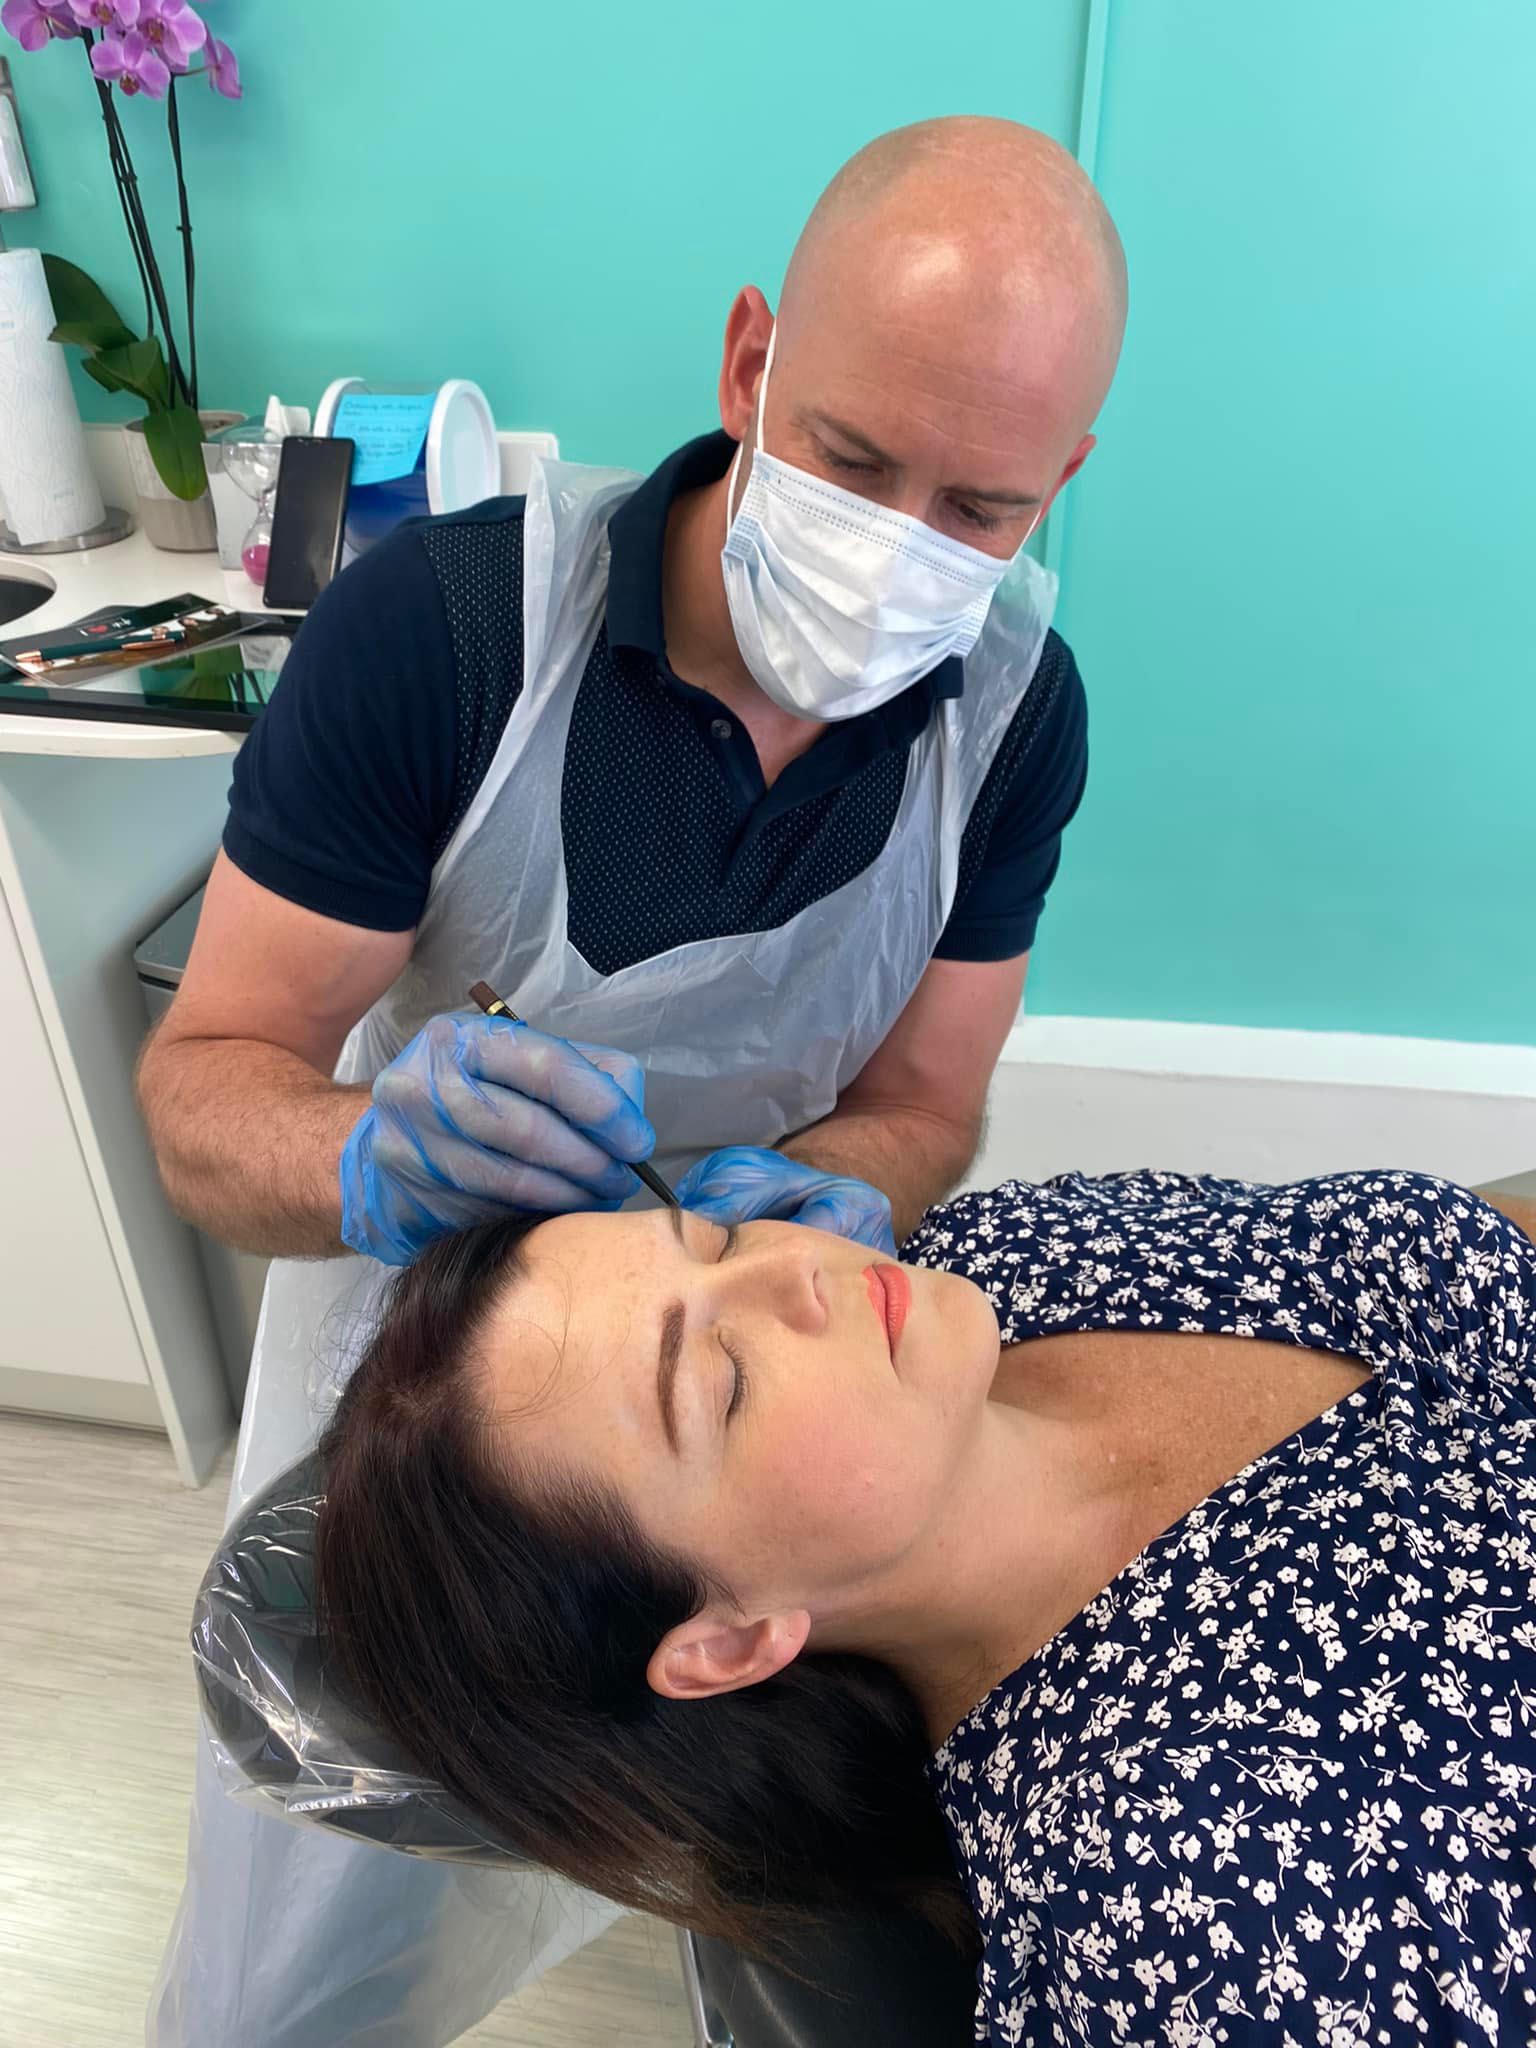 Lee doing permanent makeup on his second client in training